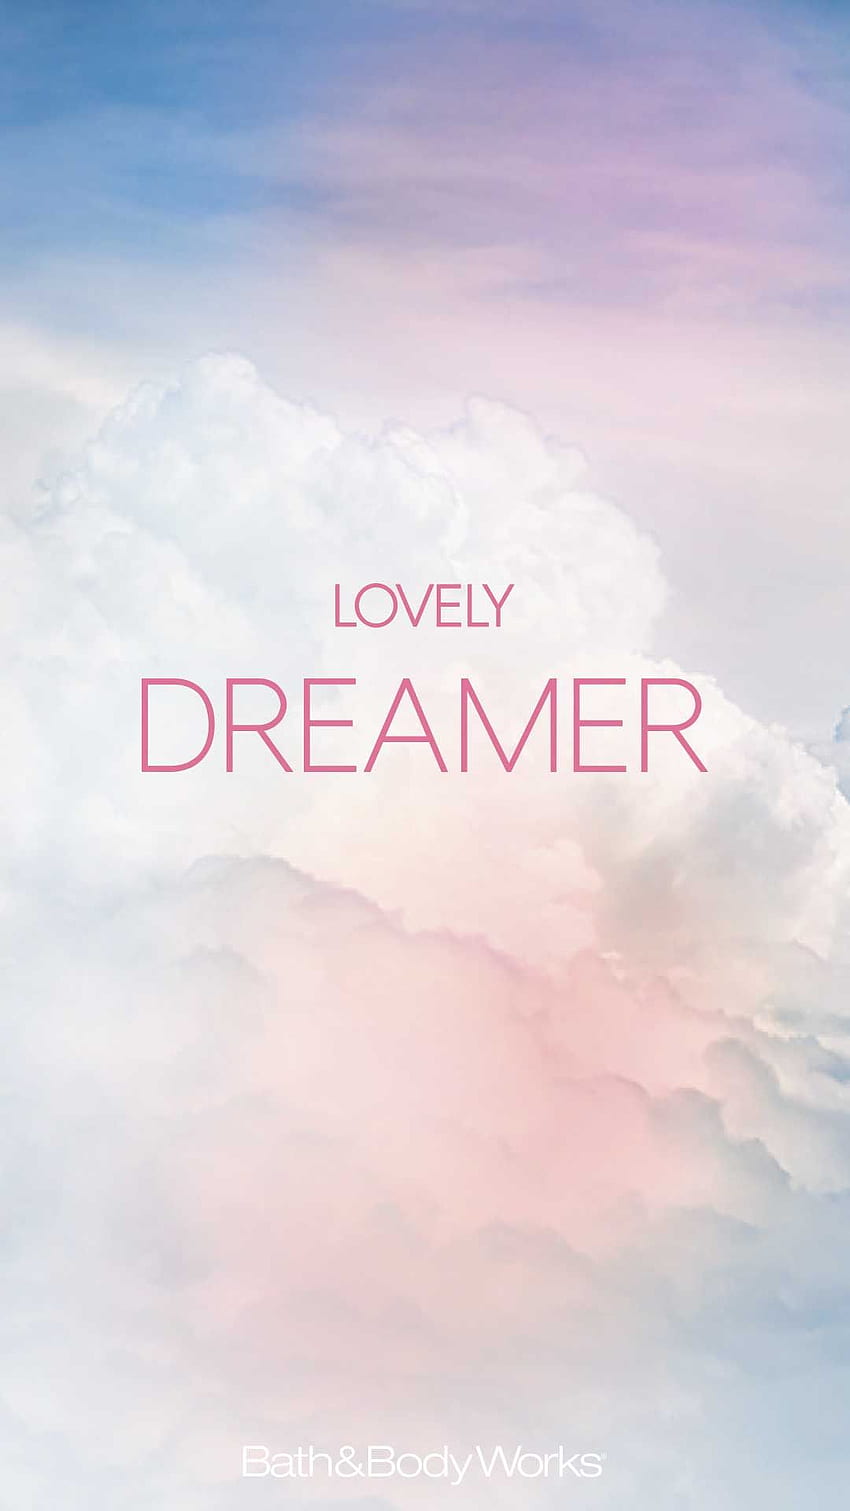 Lovely Dreamer iPhone . Words , The dreamers, Bath and body works HD phone wallpaper